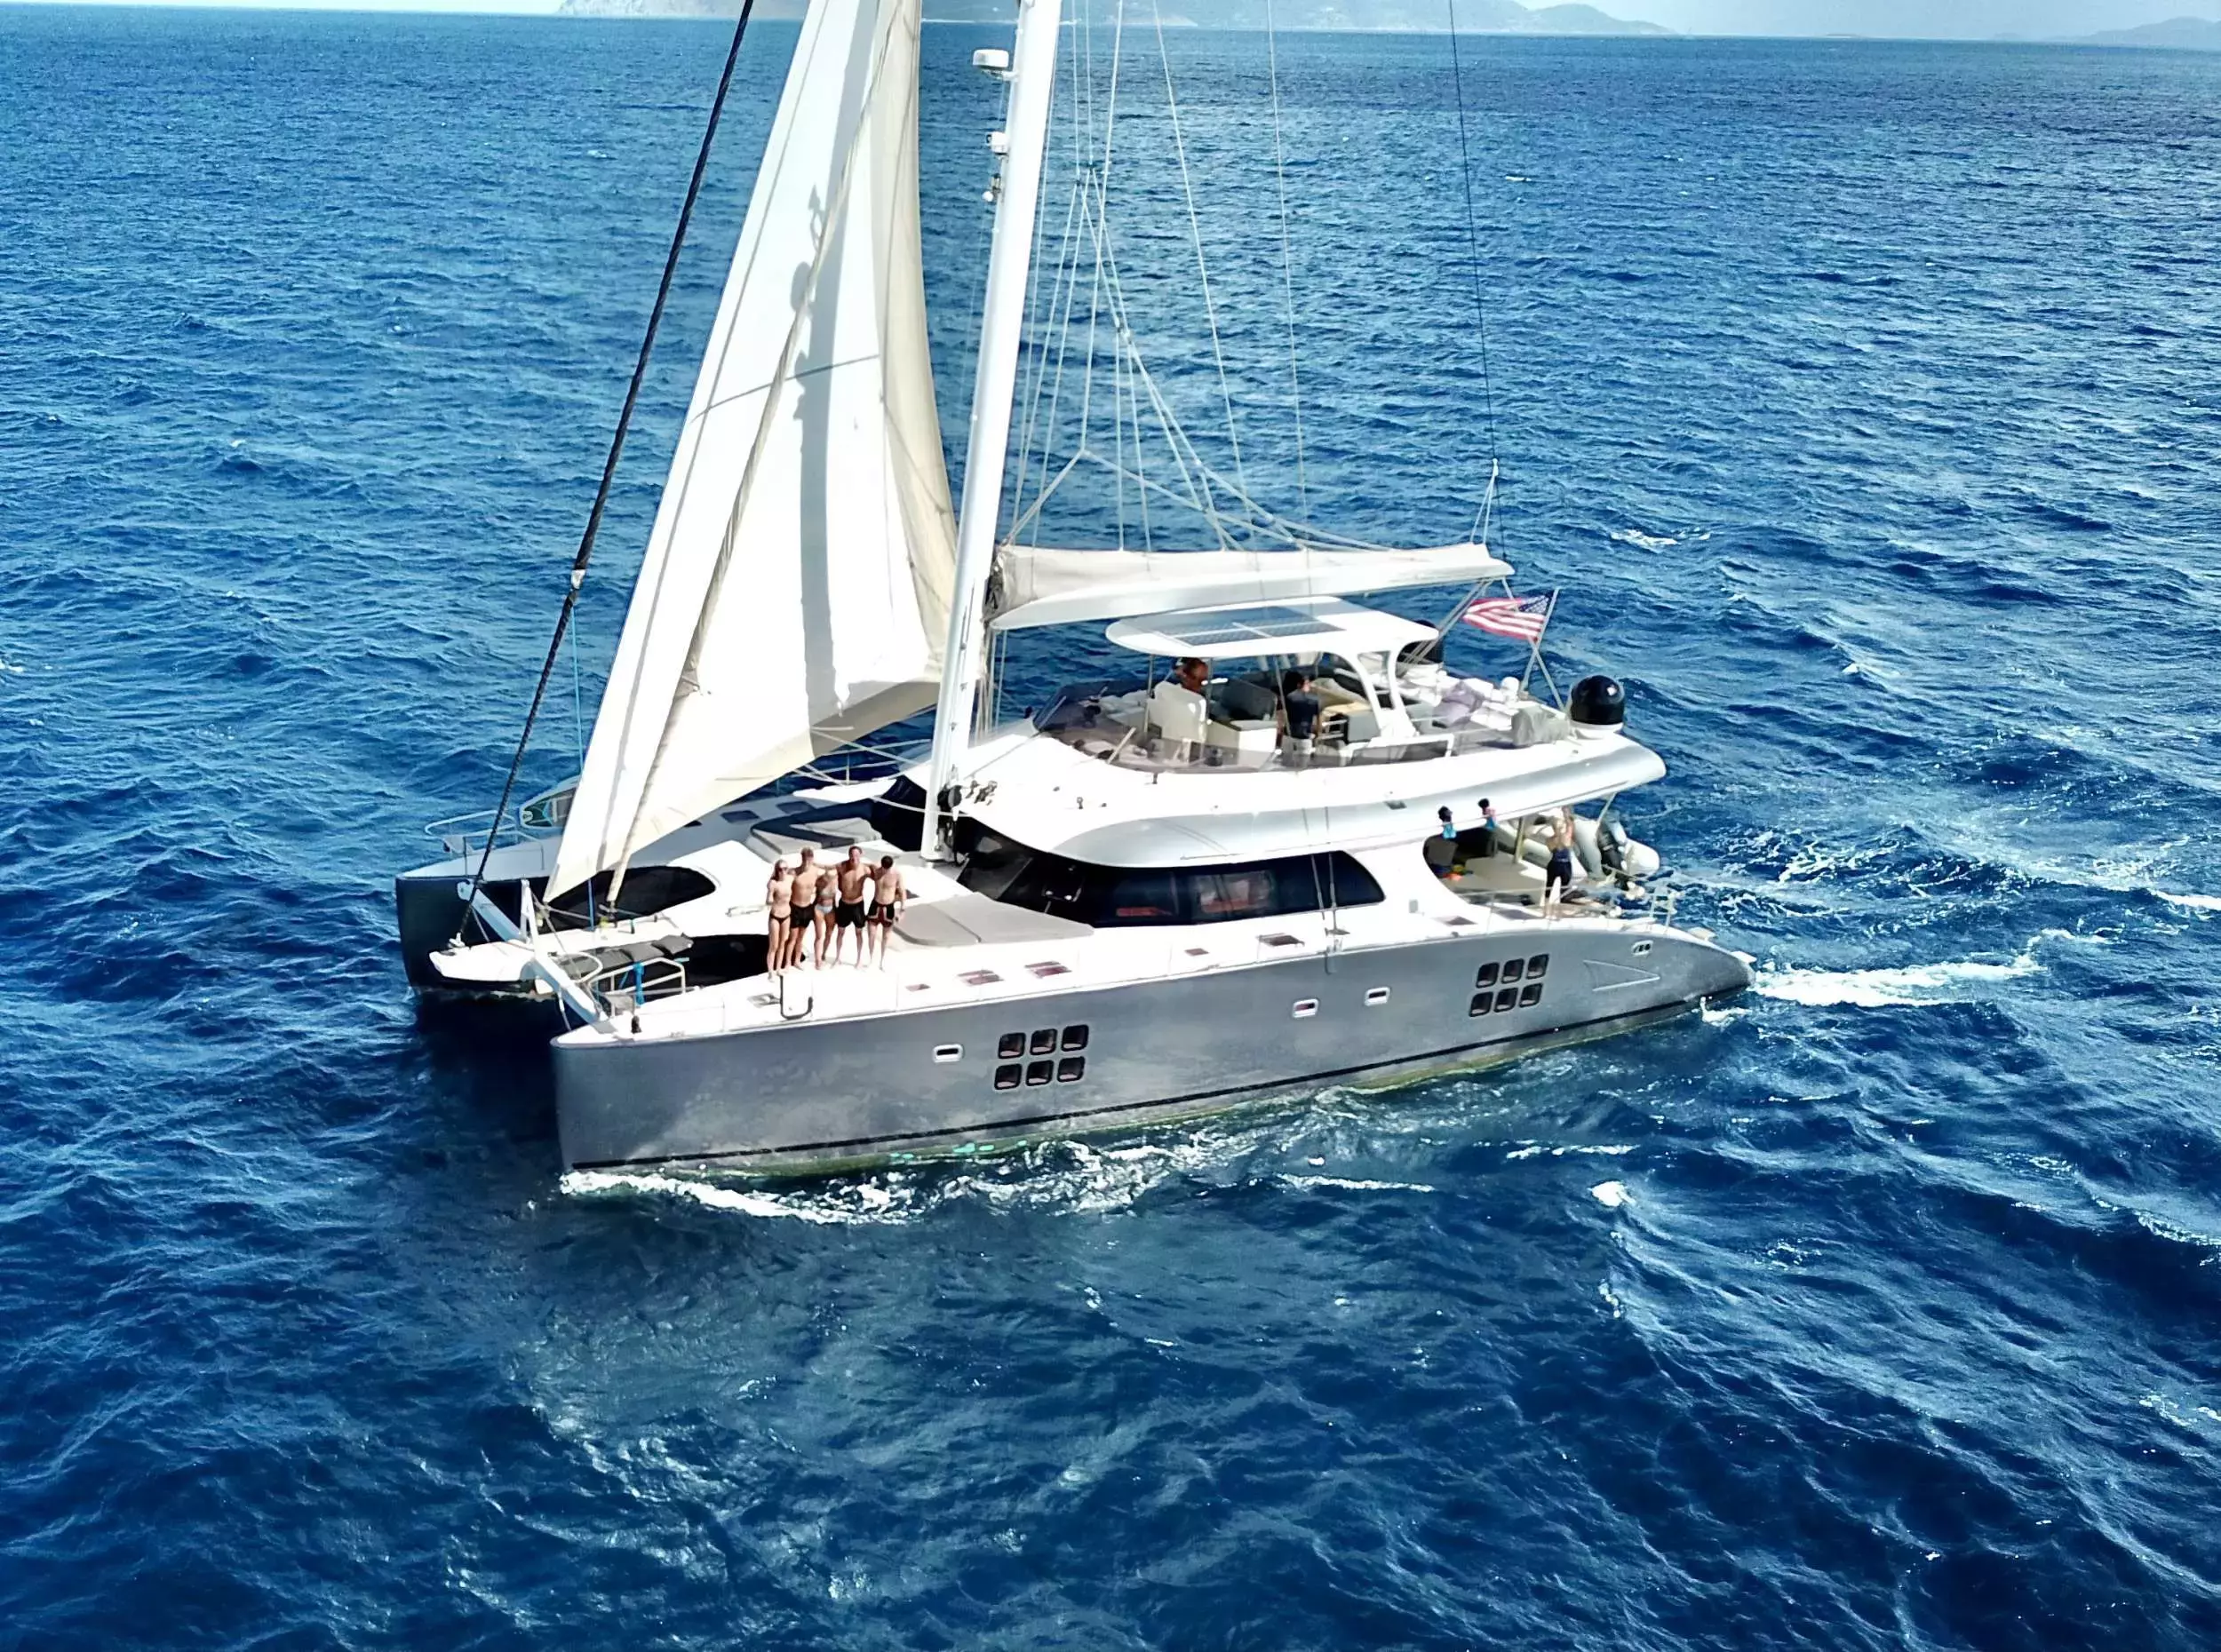 Excess by Sunreef Yachts - Special Offer for a private Luxury Catamaran Rental in Tortola with a crew